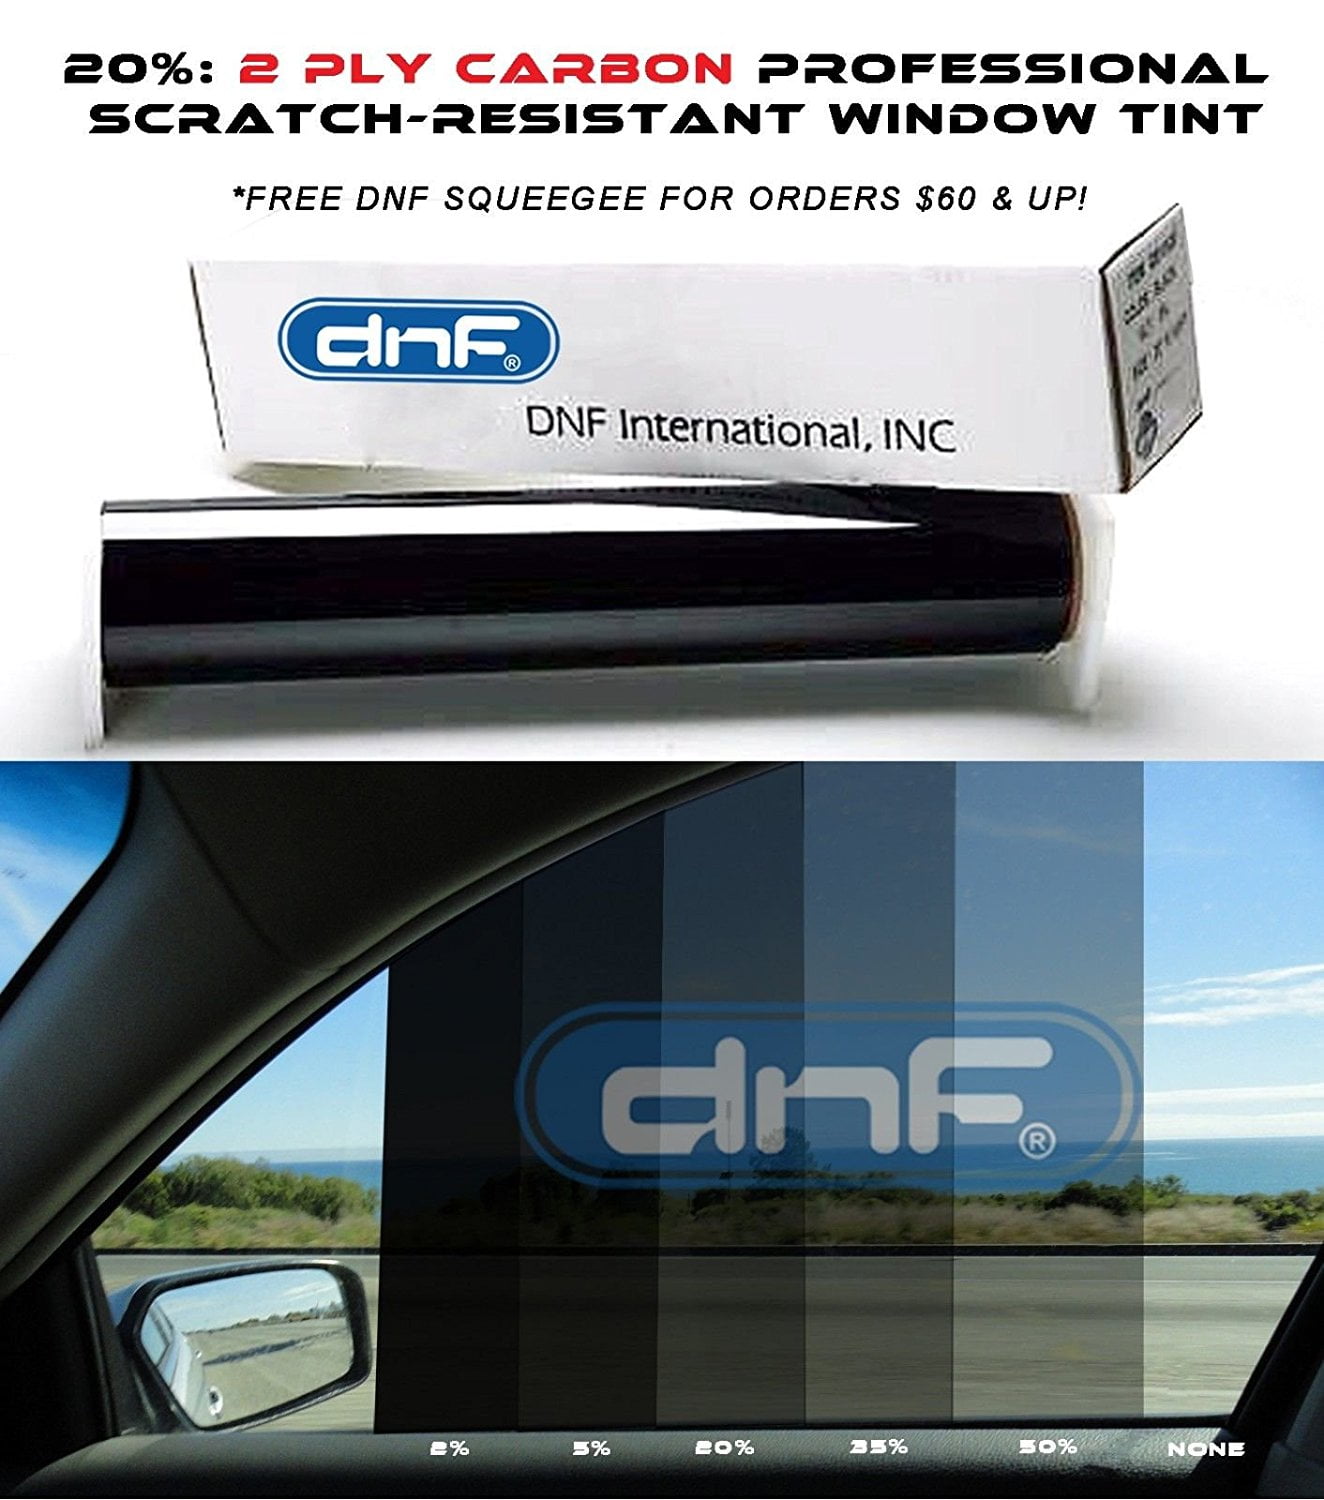 PROTEC Grey 20% 24 X100FT Charcoal 2PLY HIGH Performance Window Film Tint ROLL 